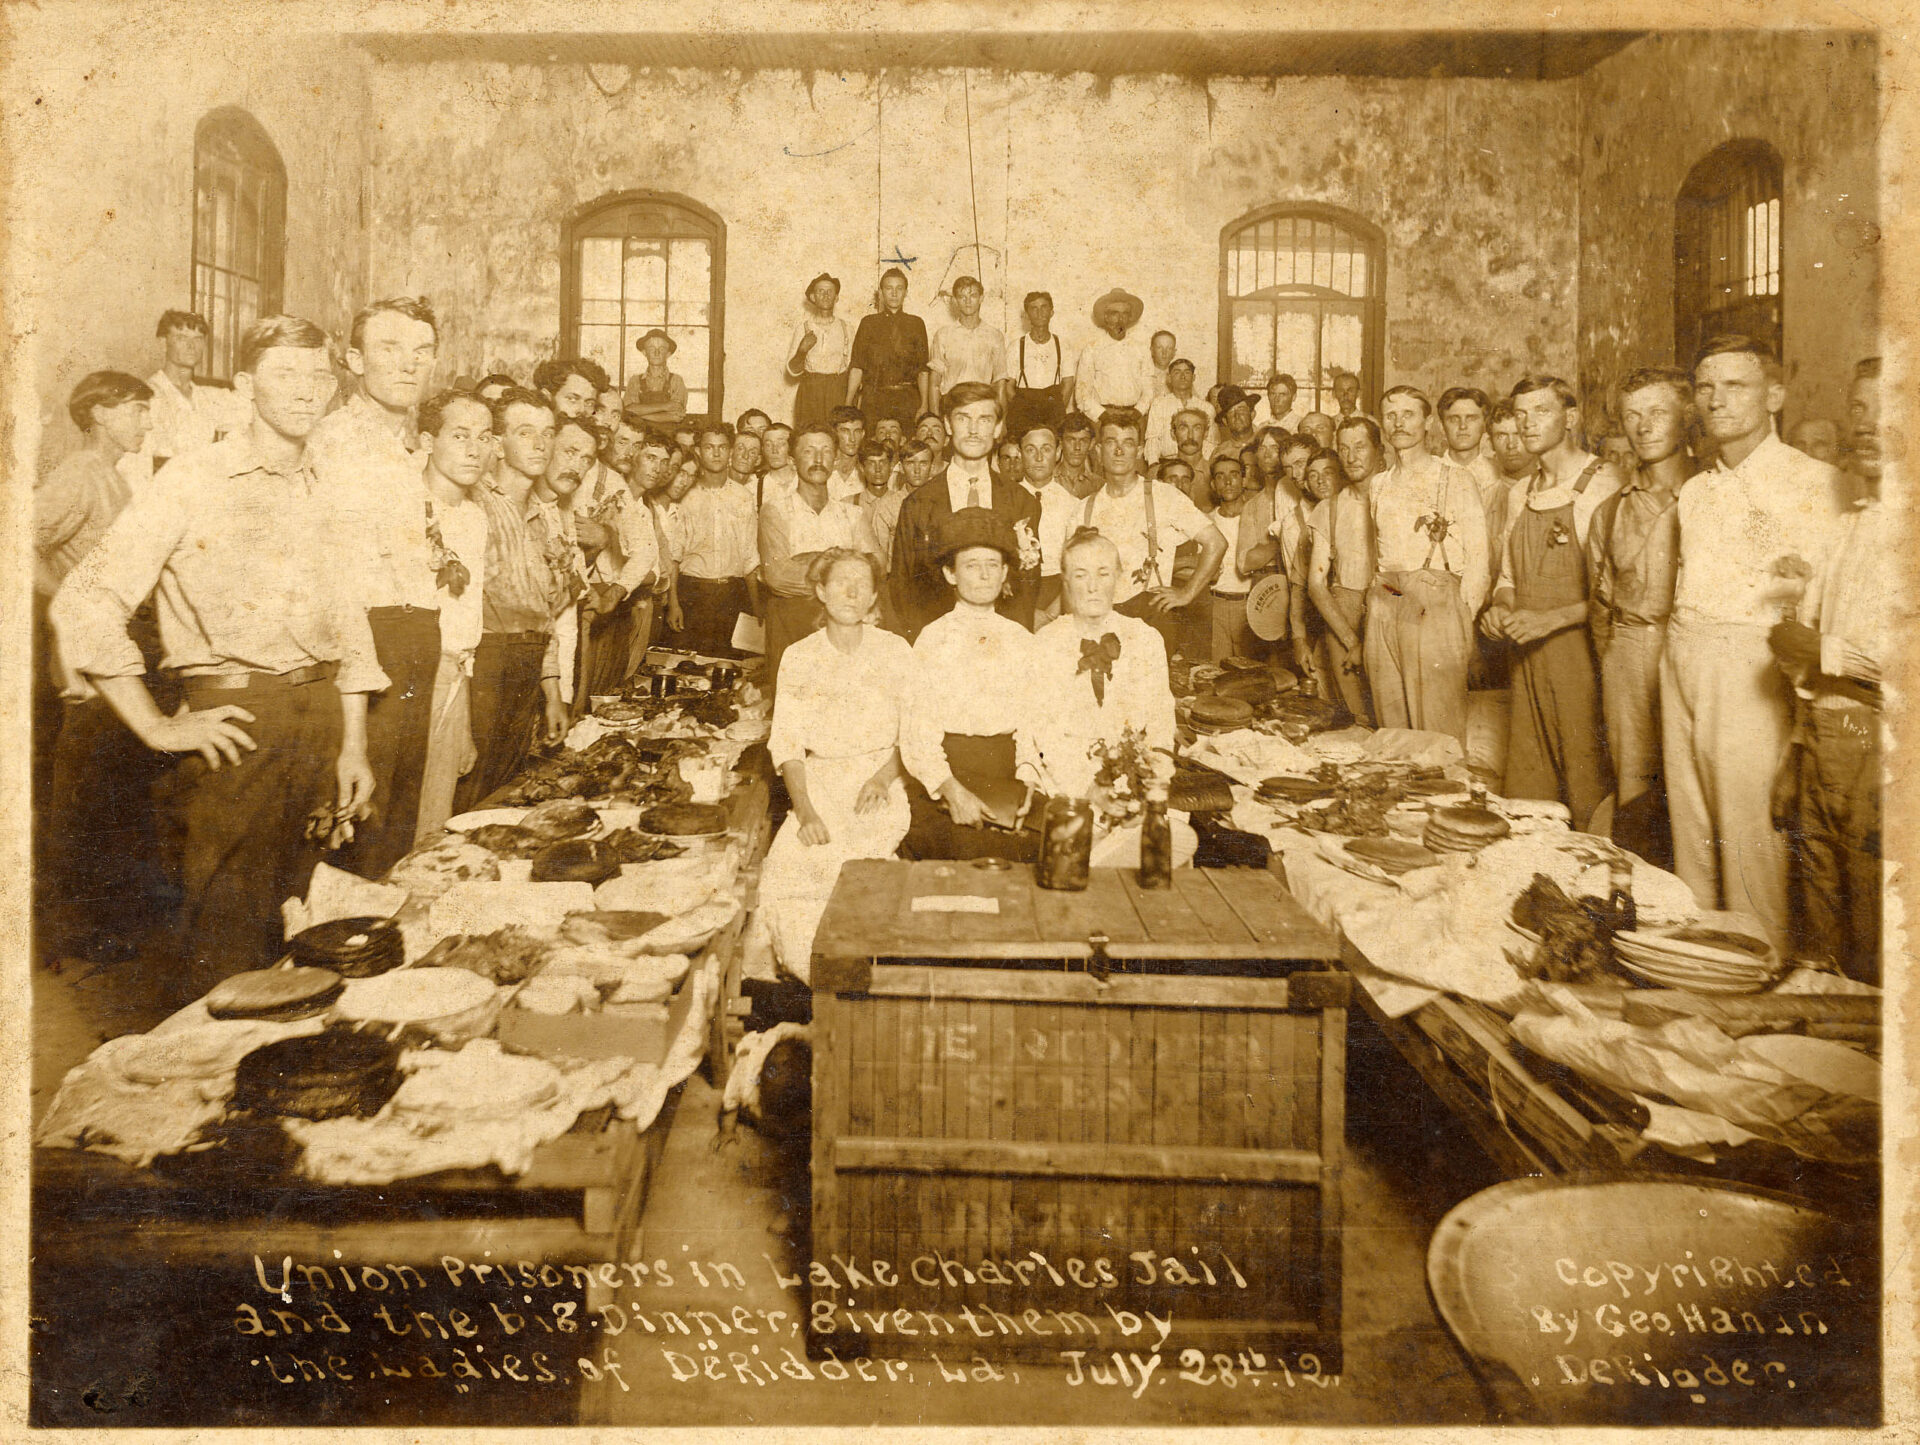 Union Members in Jail after the Grabow Riot, 1912